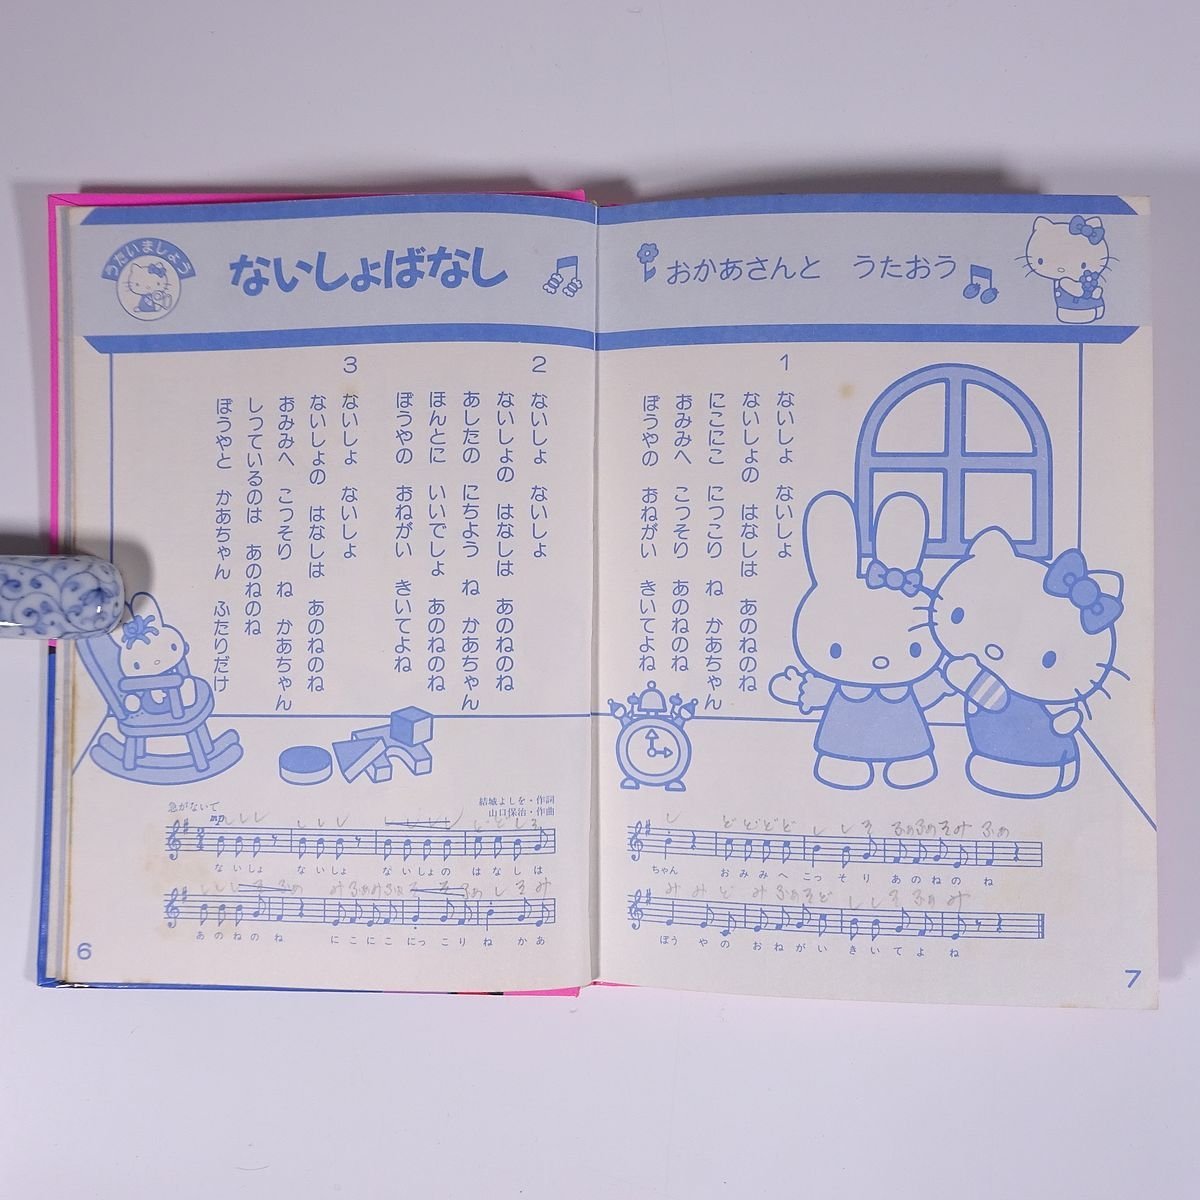 [ musical score ] all throat . for ... Sanrio game picture book corporation Sanrio 1987 separate volume music nursery rhyme * writing equipped 